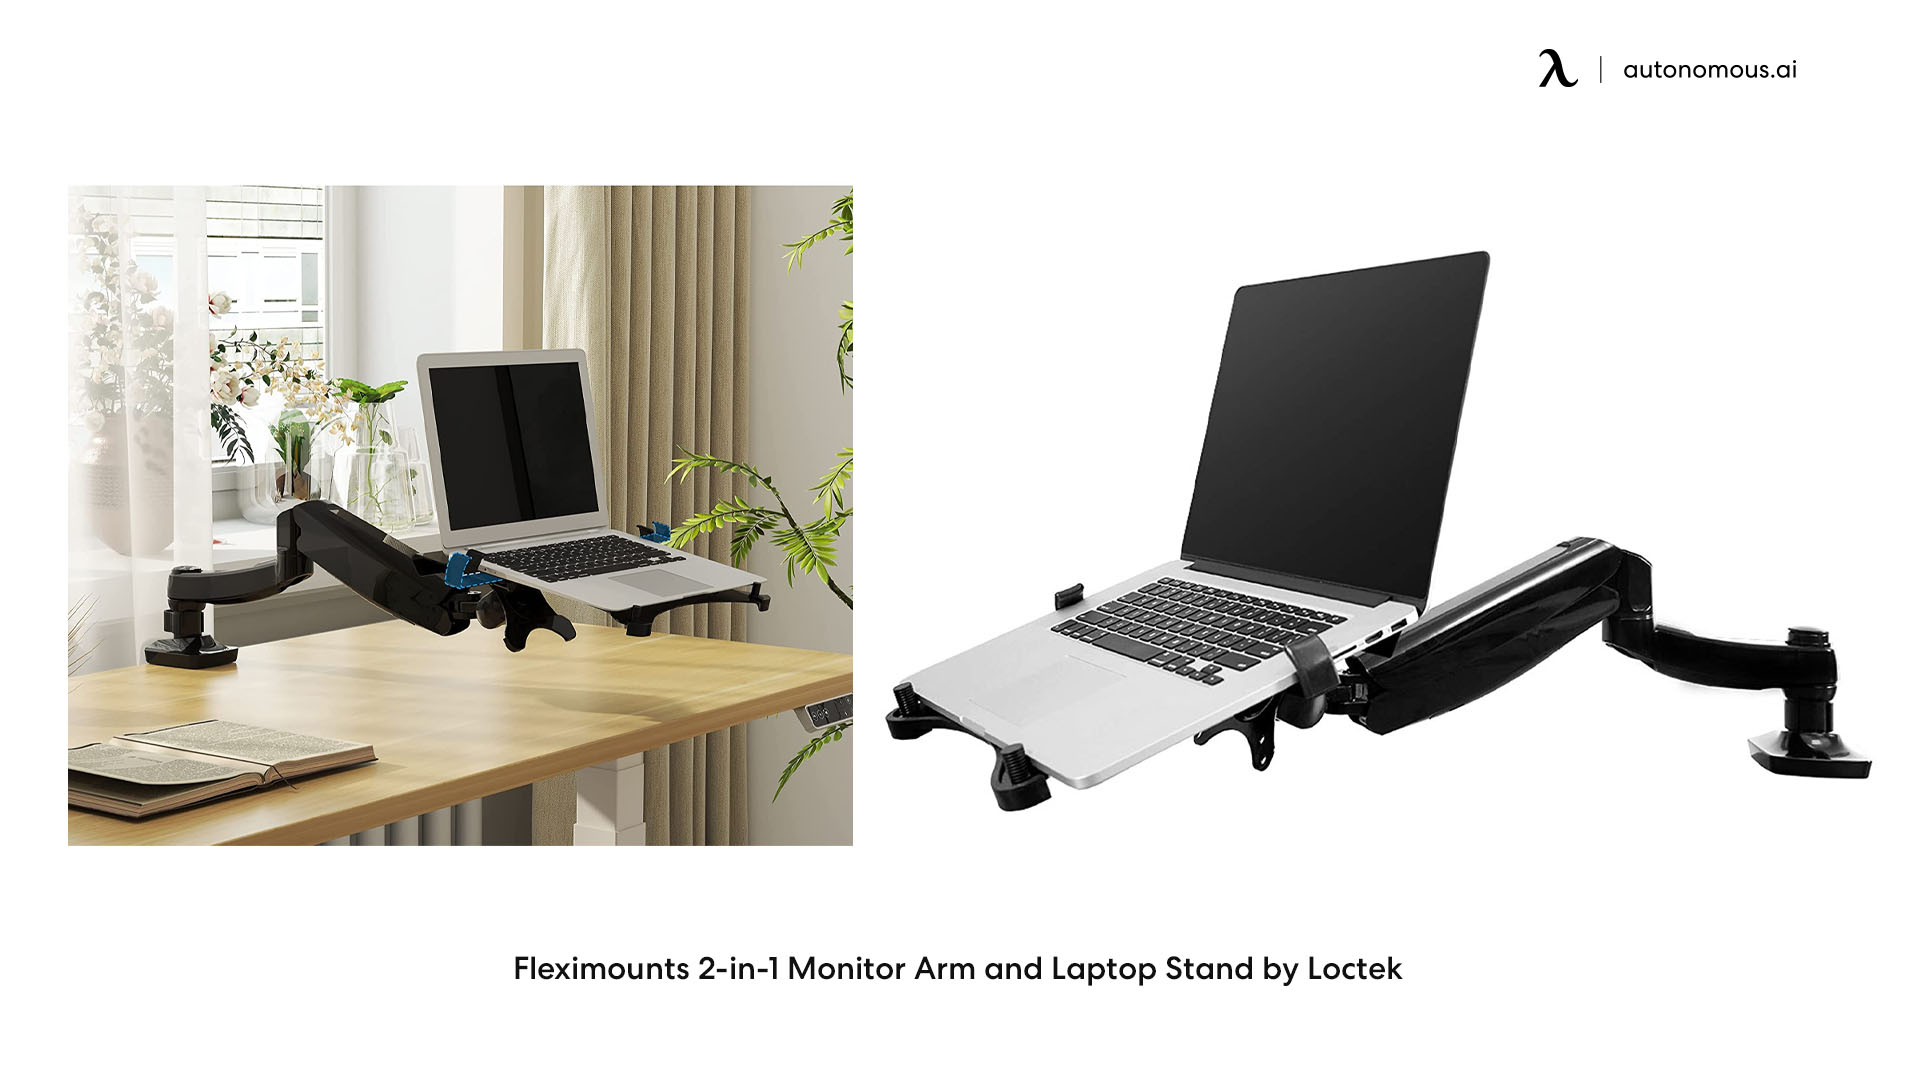 Fleximounts 2-in-1 Monitor Arm and Laptop Stand by Loctek